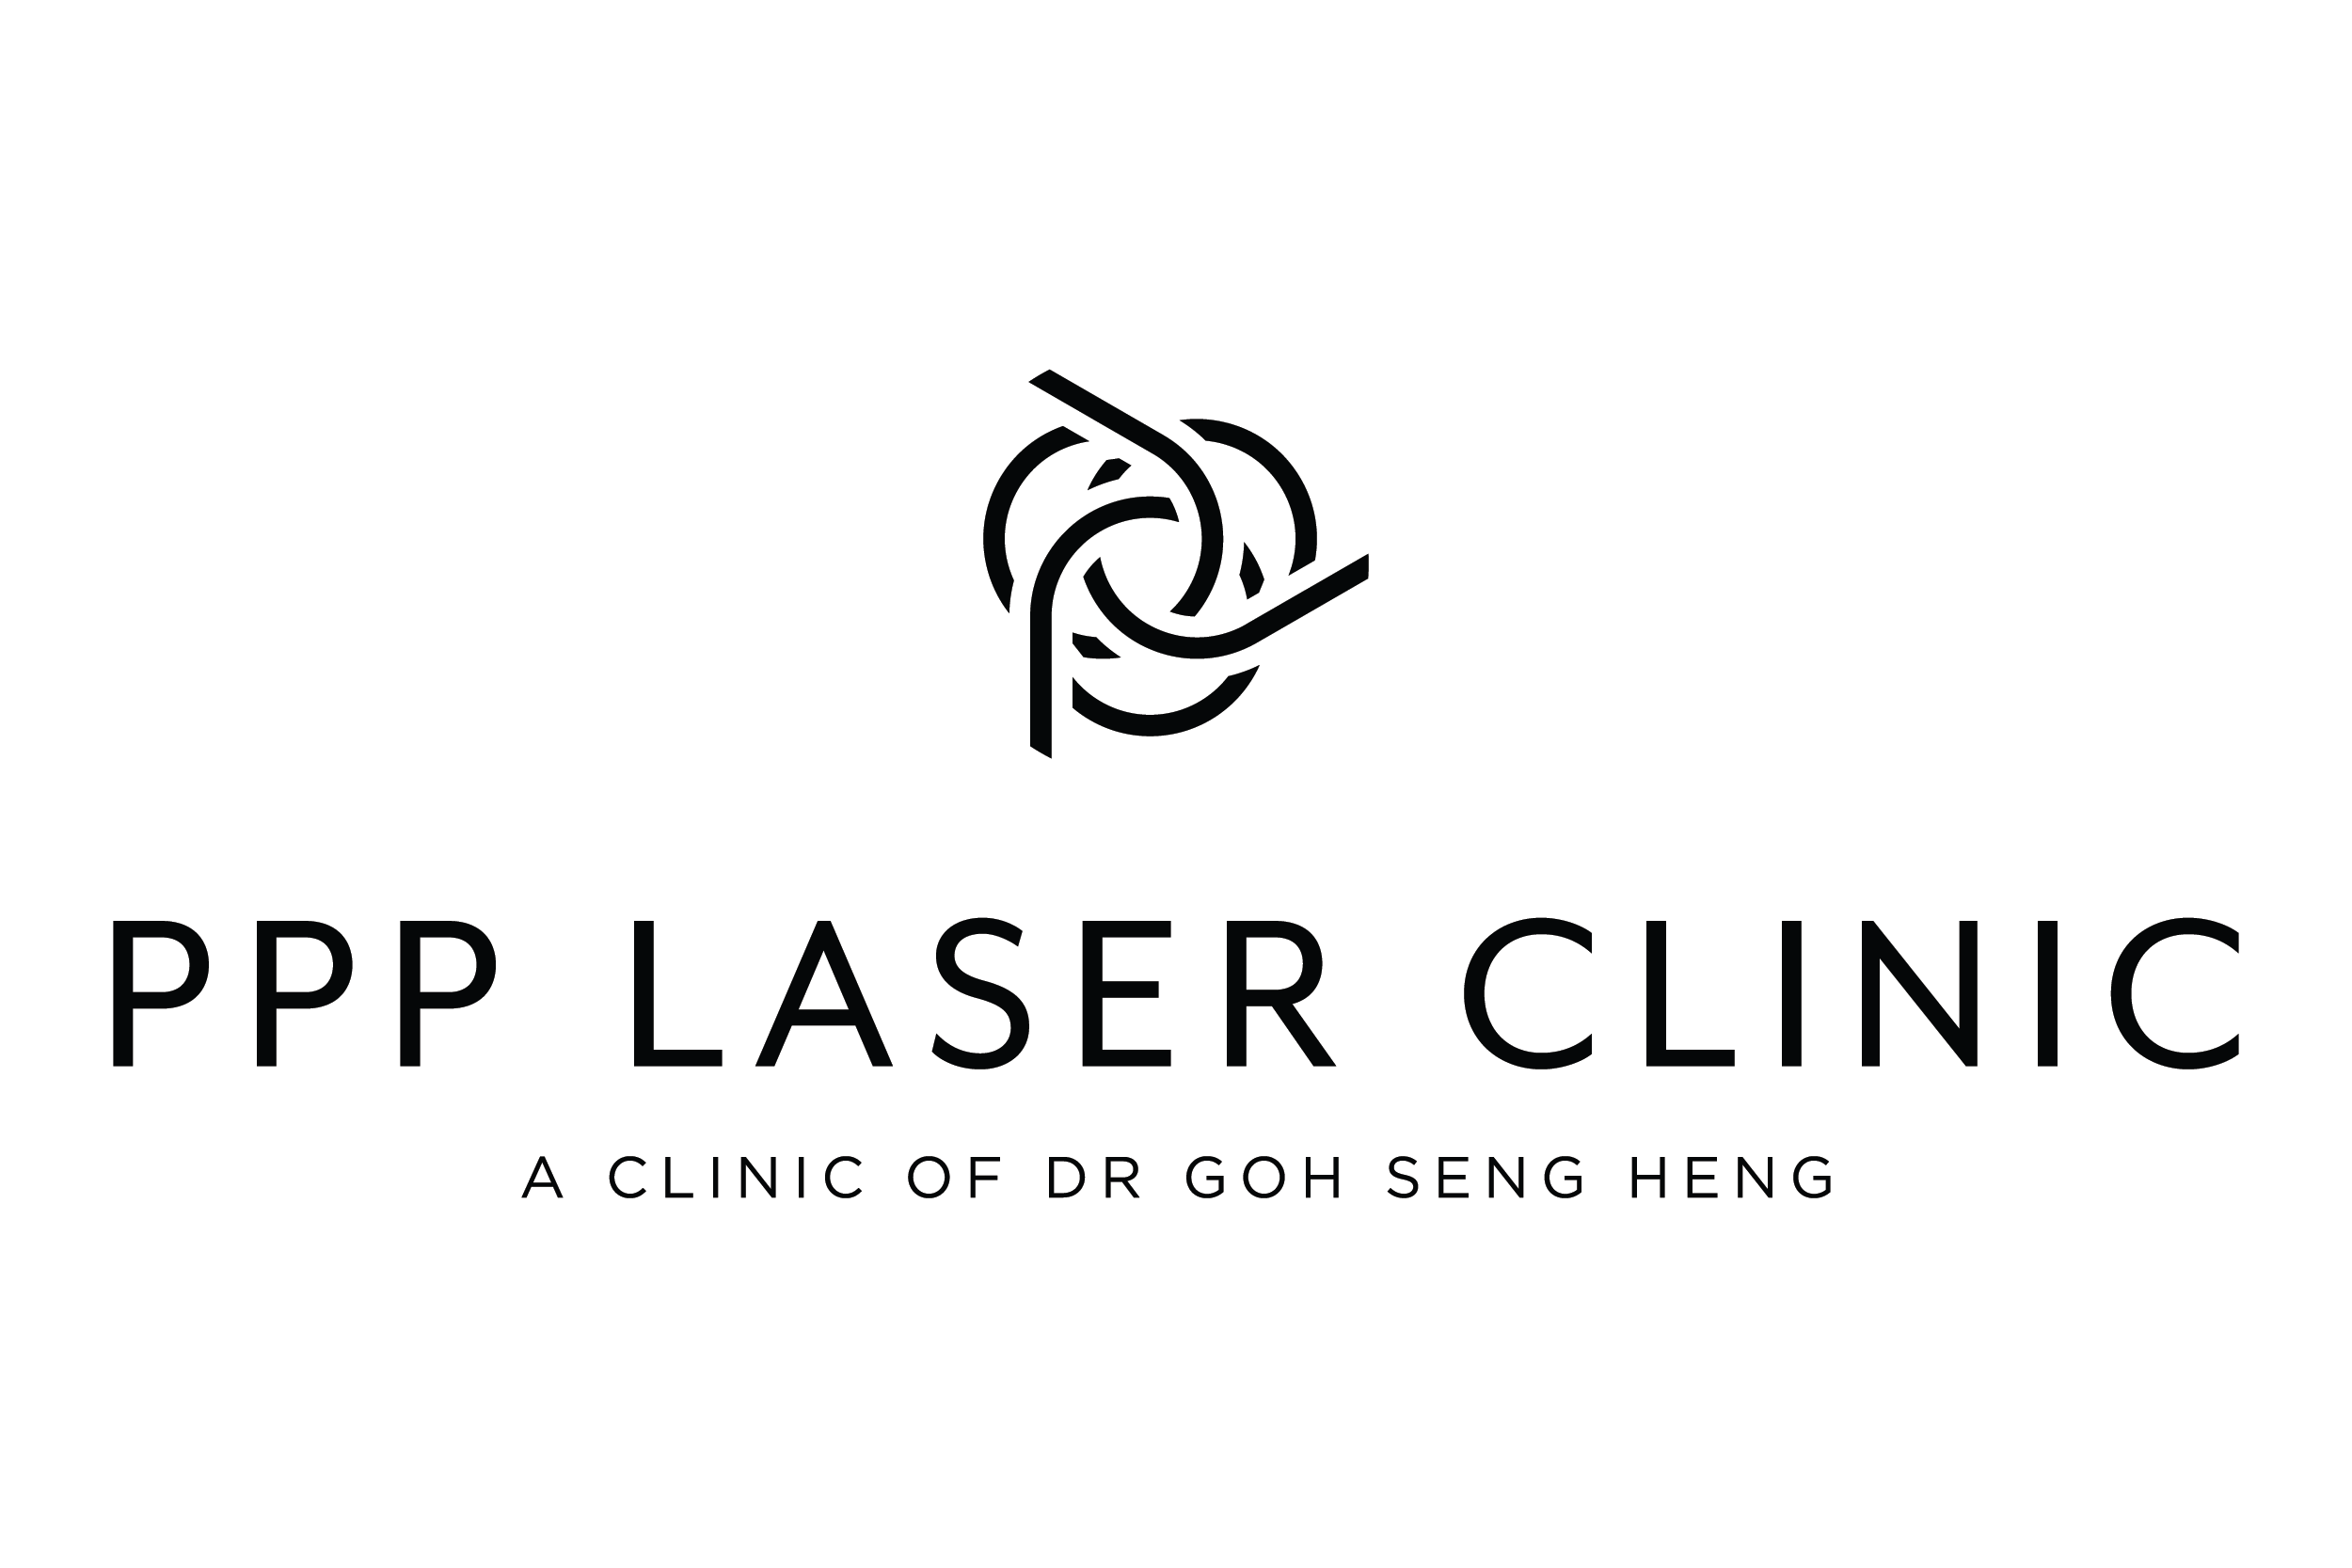 PPP LASER CLINIC 